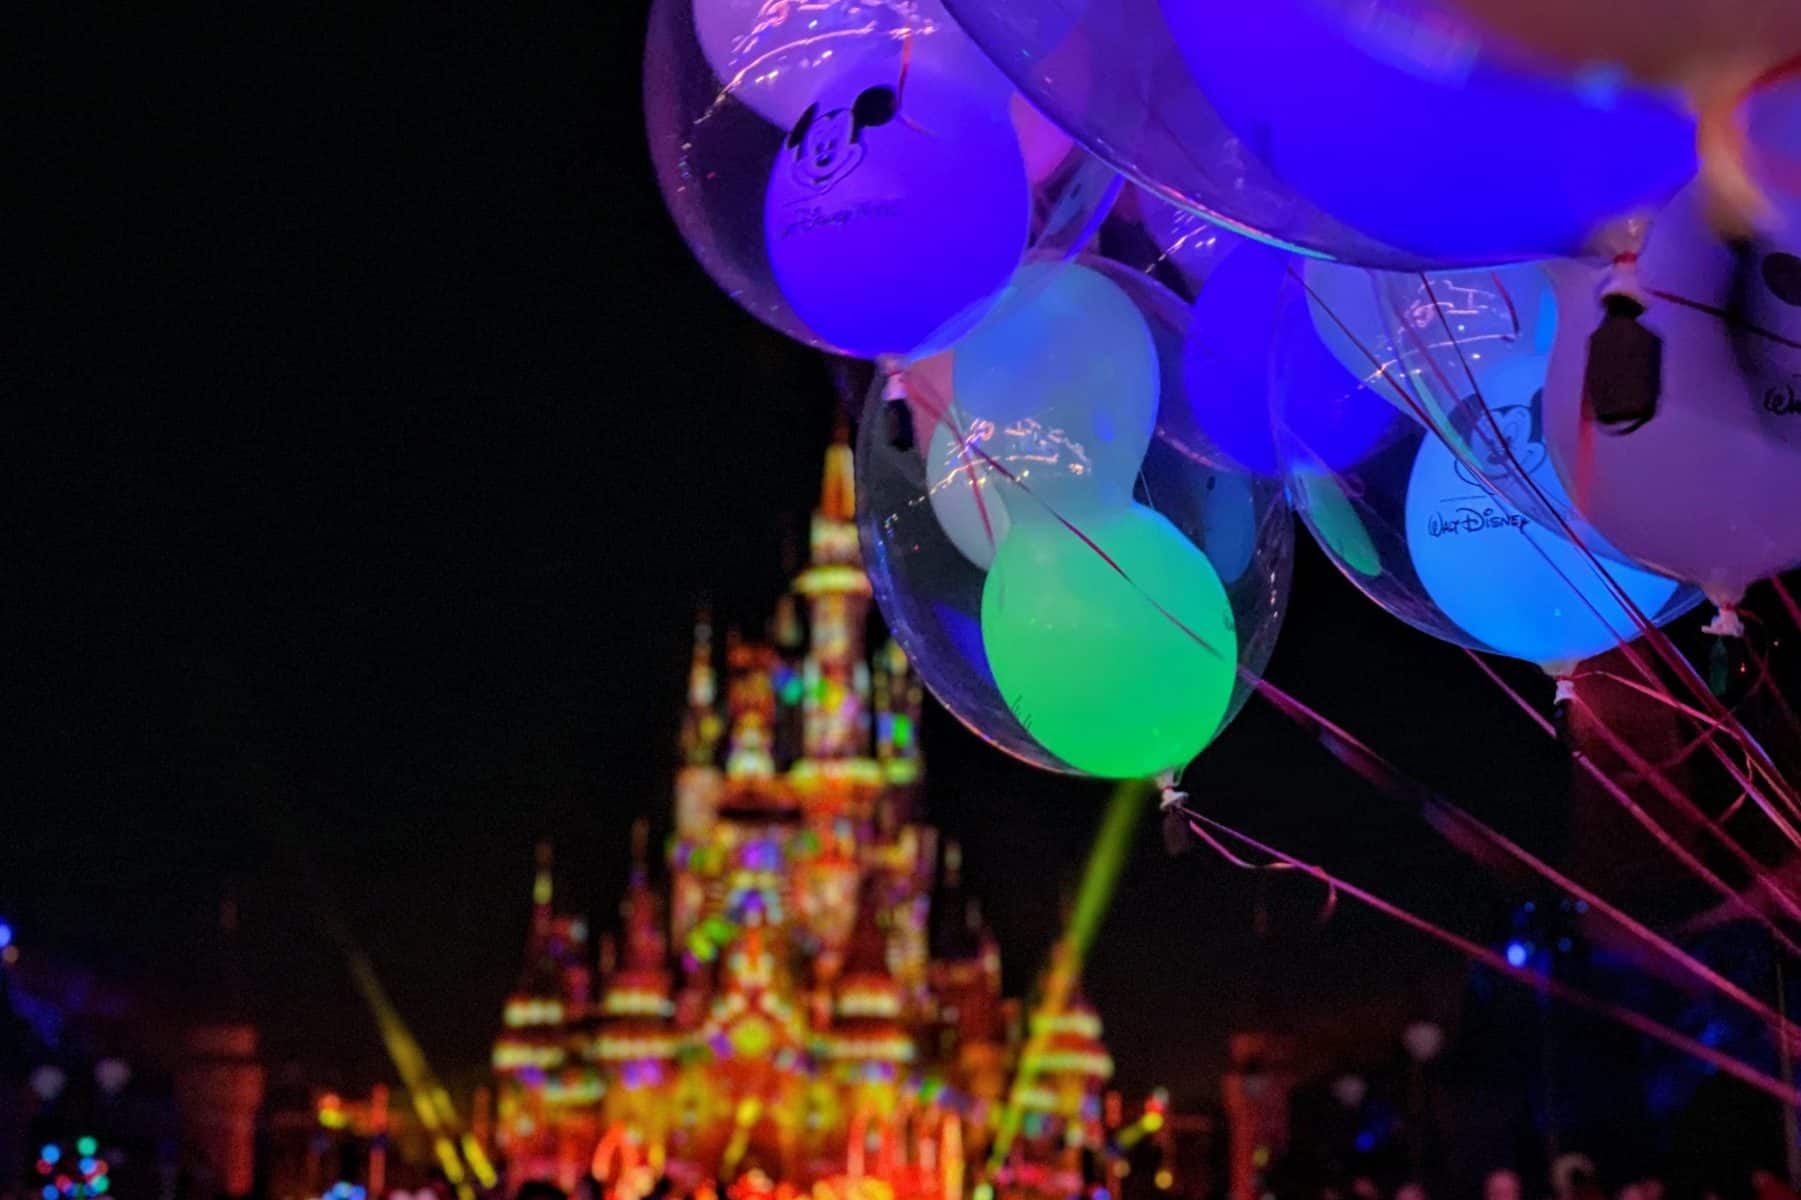 2022 Guide to the Holidays at Disney World